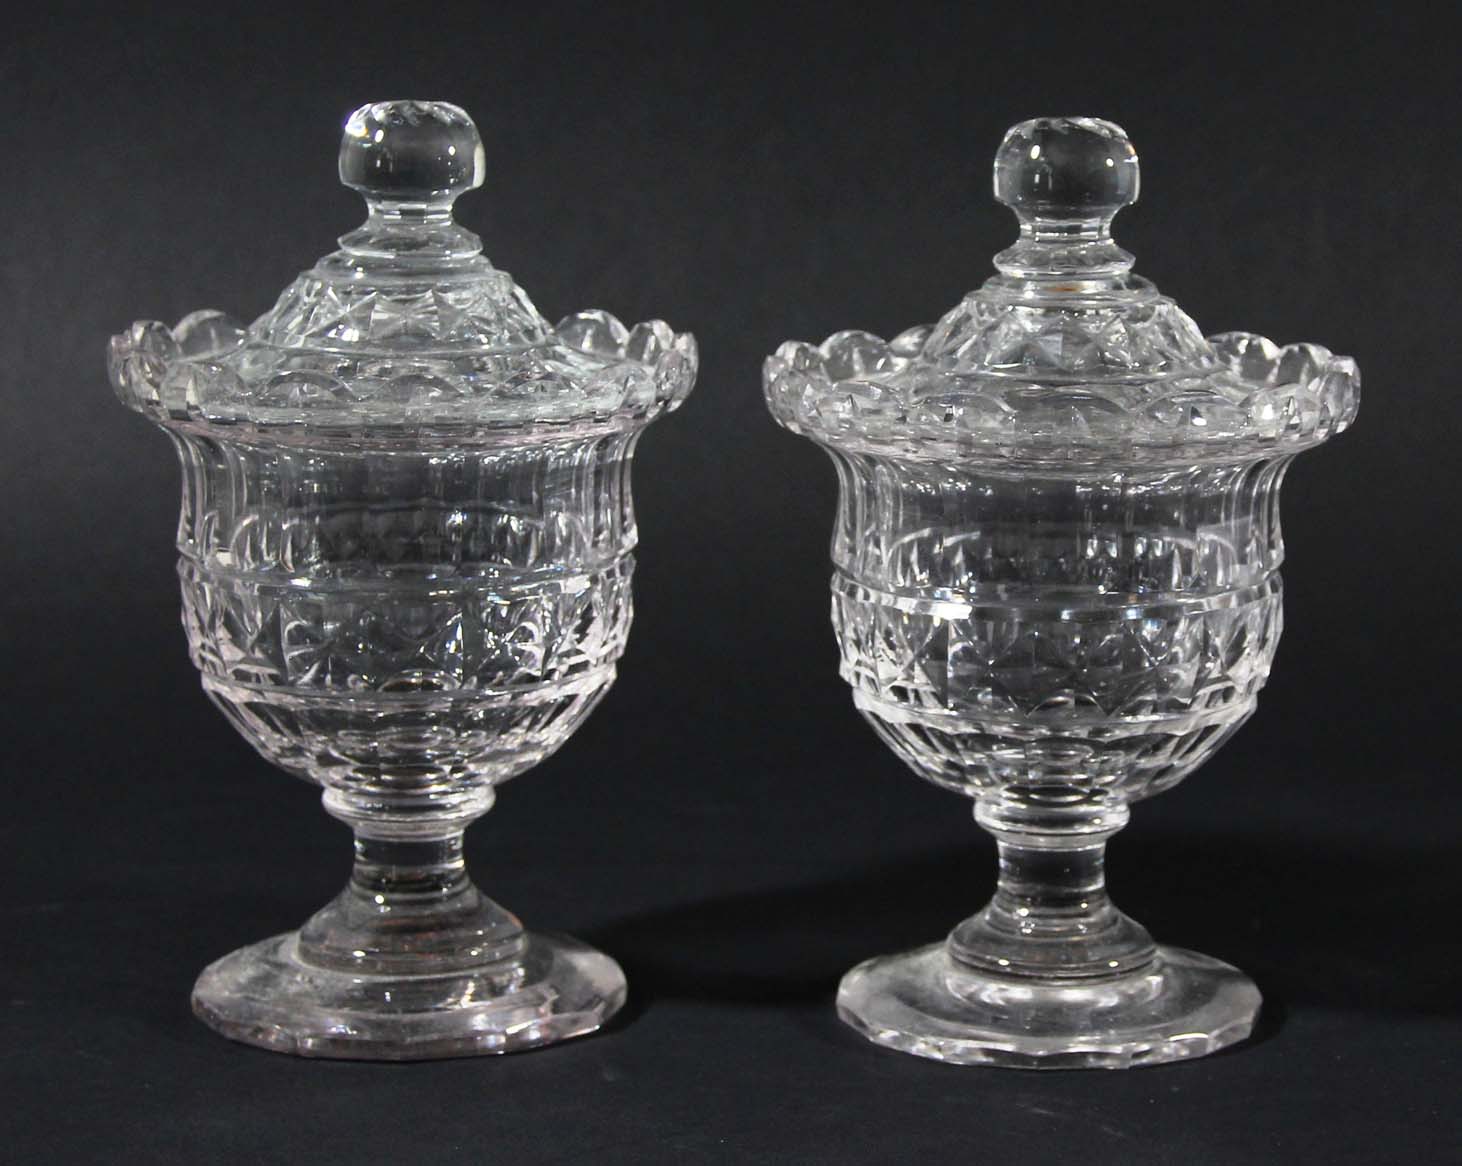 PAIR OF LATE GEORGIAN CUT GLASS HONEY JARS AND COVERS, of footed urn form with faceted decoration,